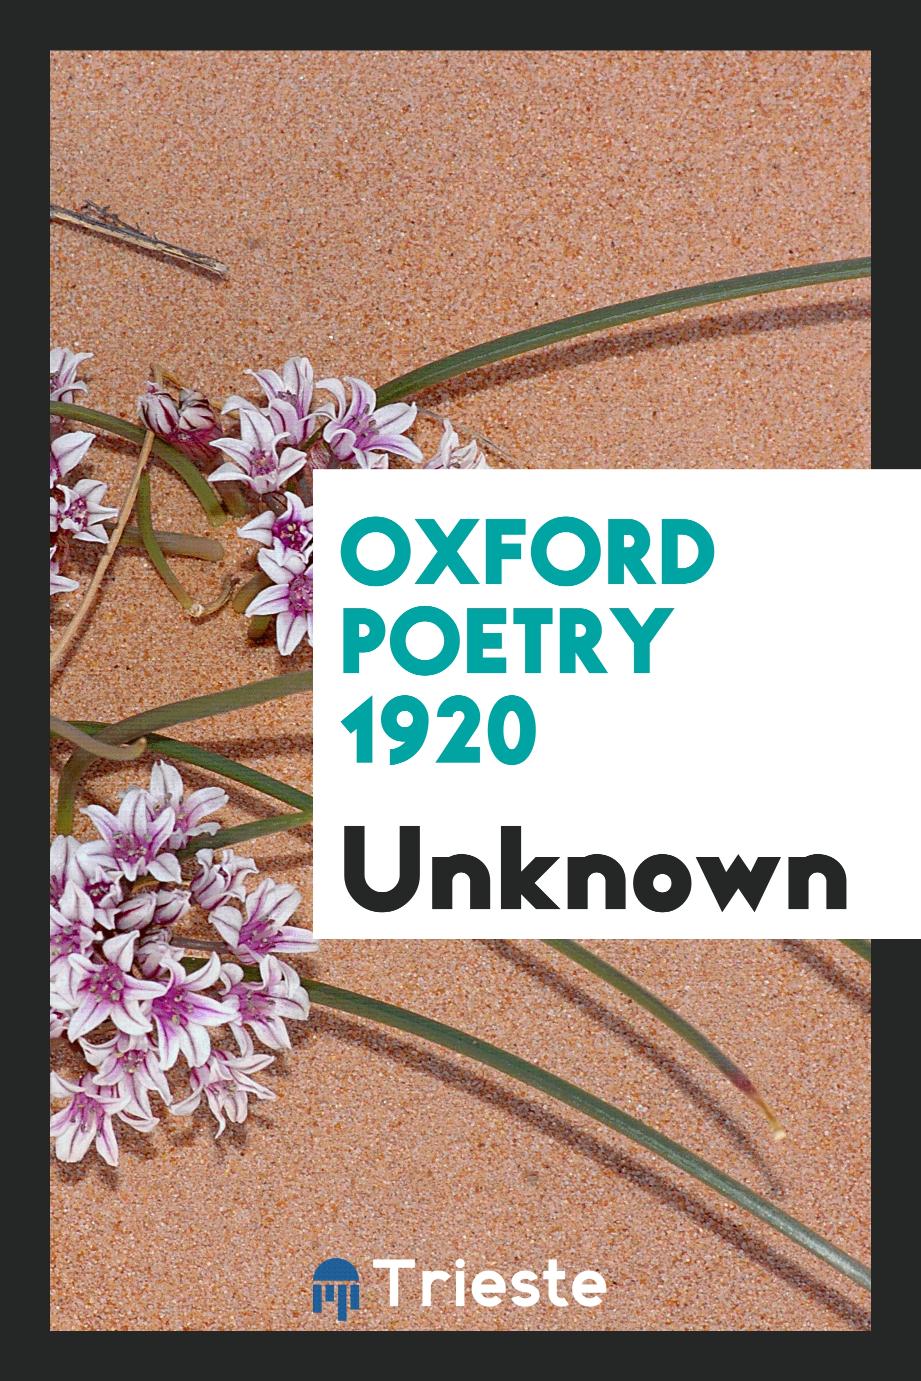 Oxford poetry 1920